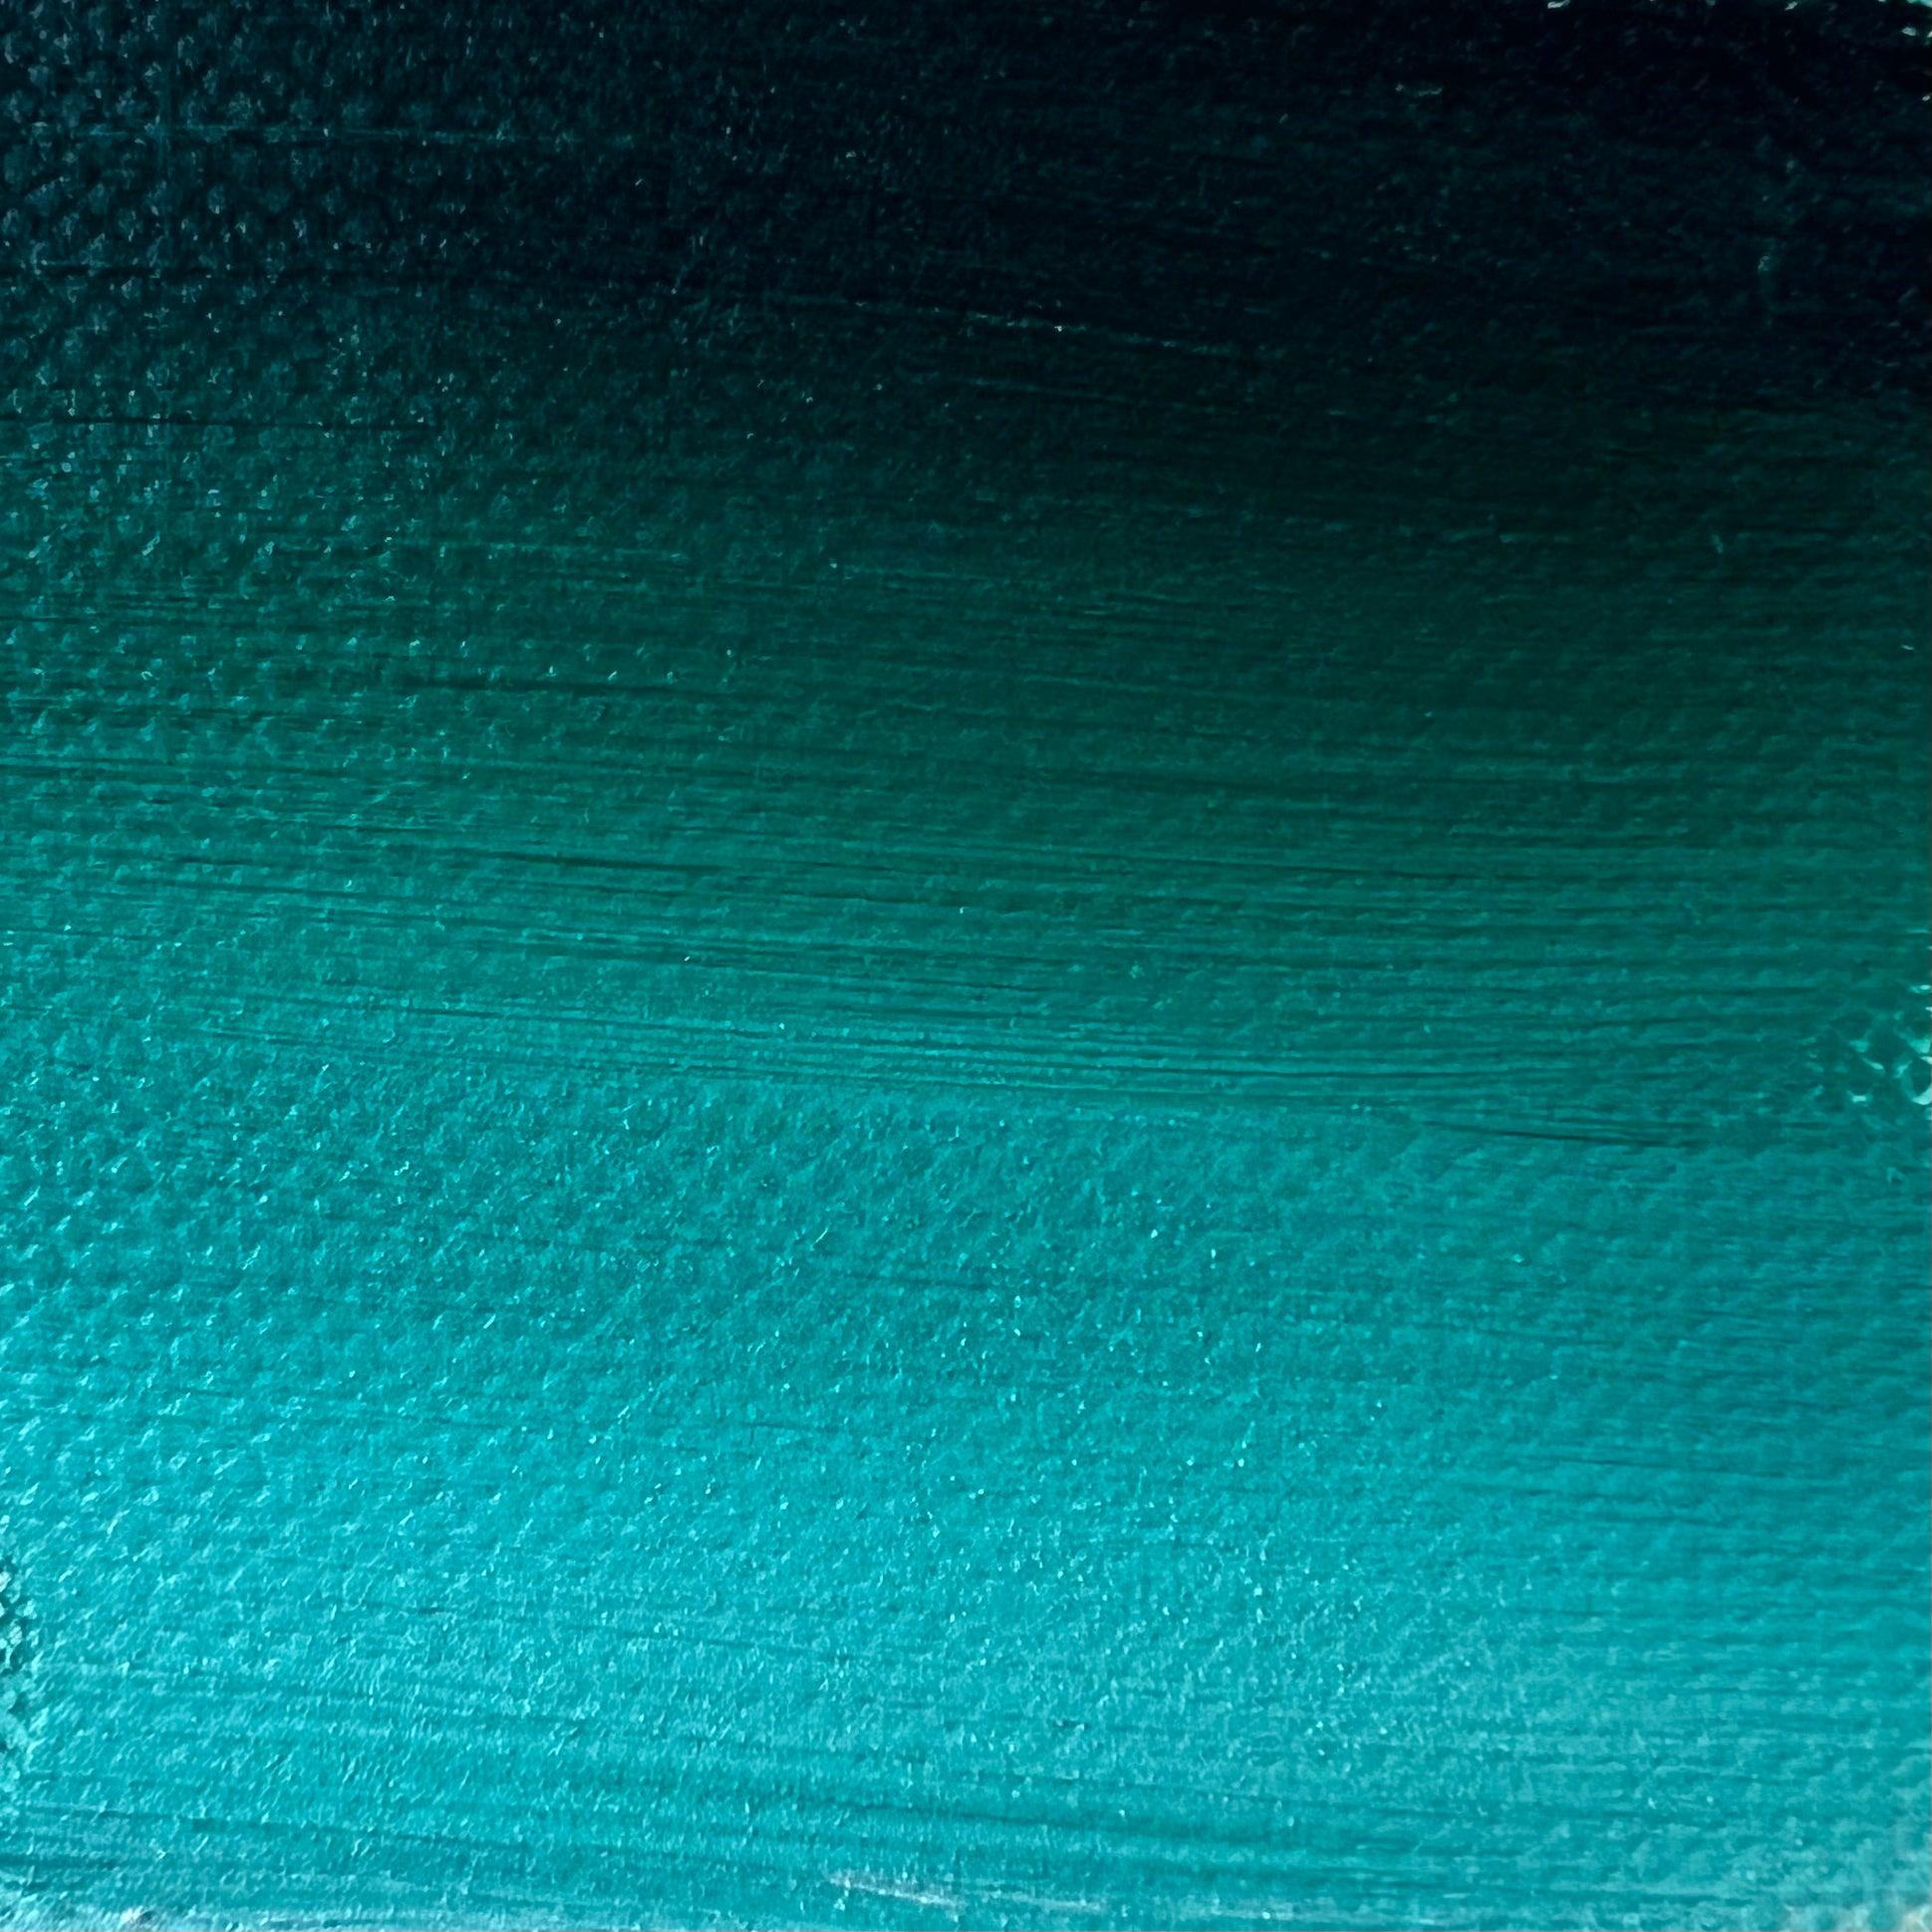 Phthalo Teal Green